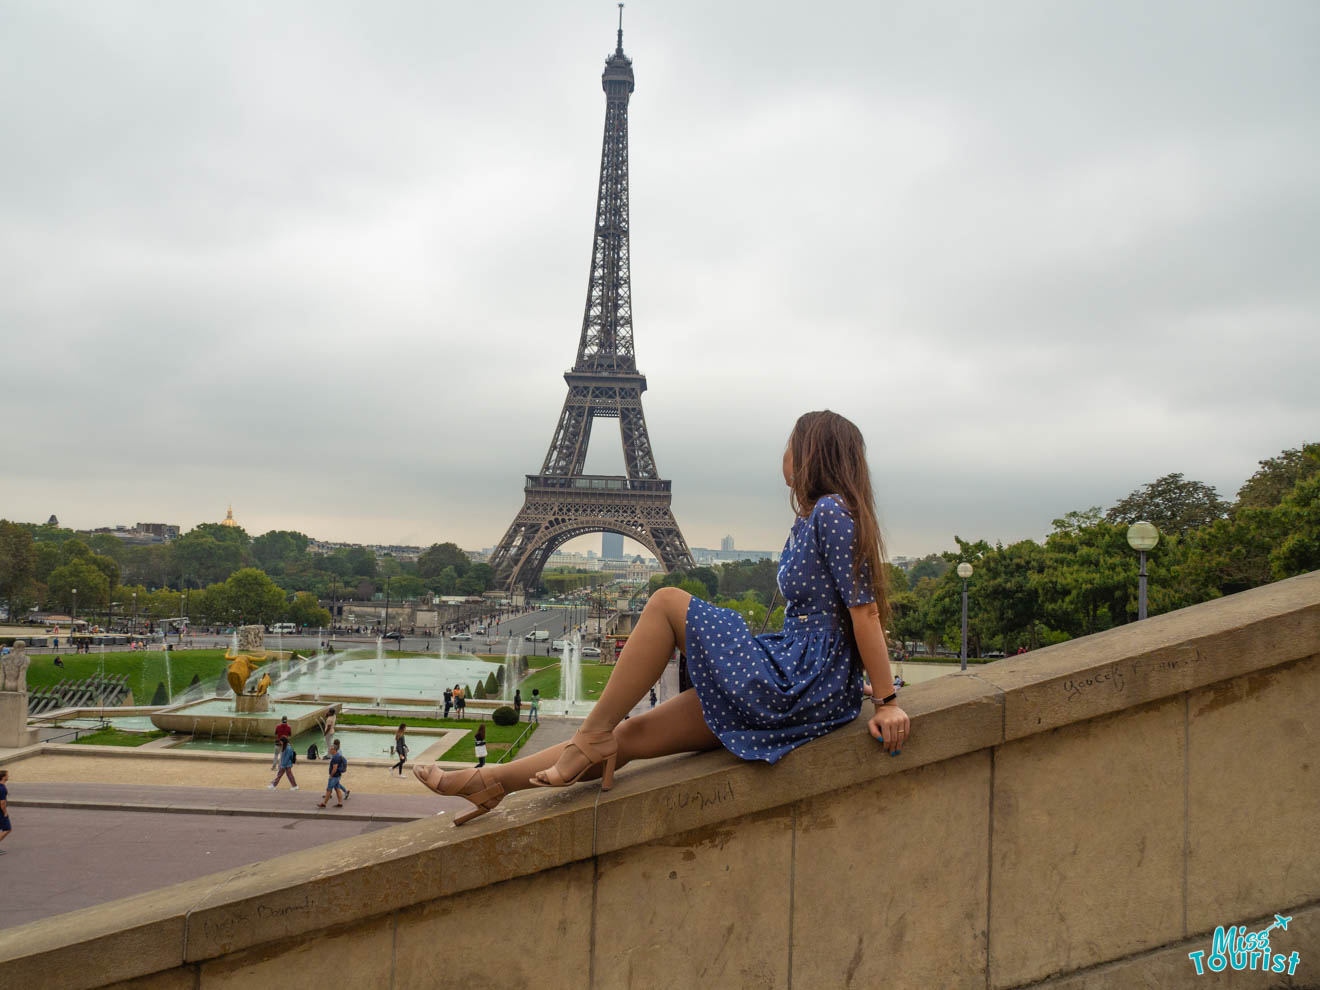 Yulia, the author of the post, sitting on a ledge in front of the eiffel tower.